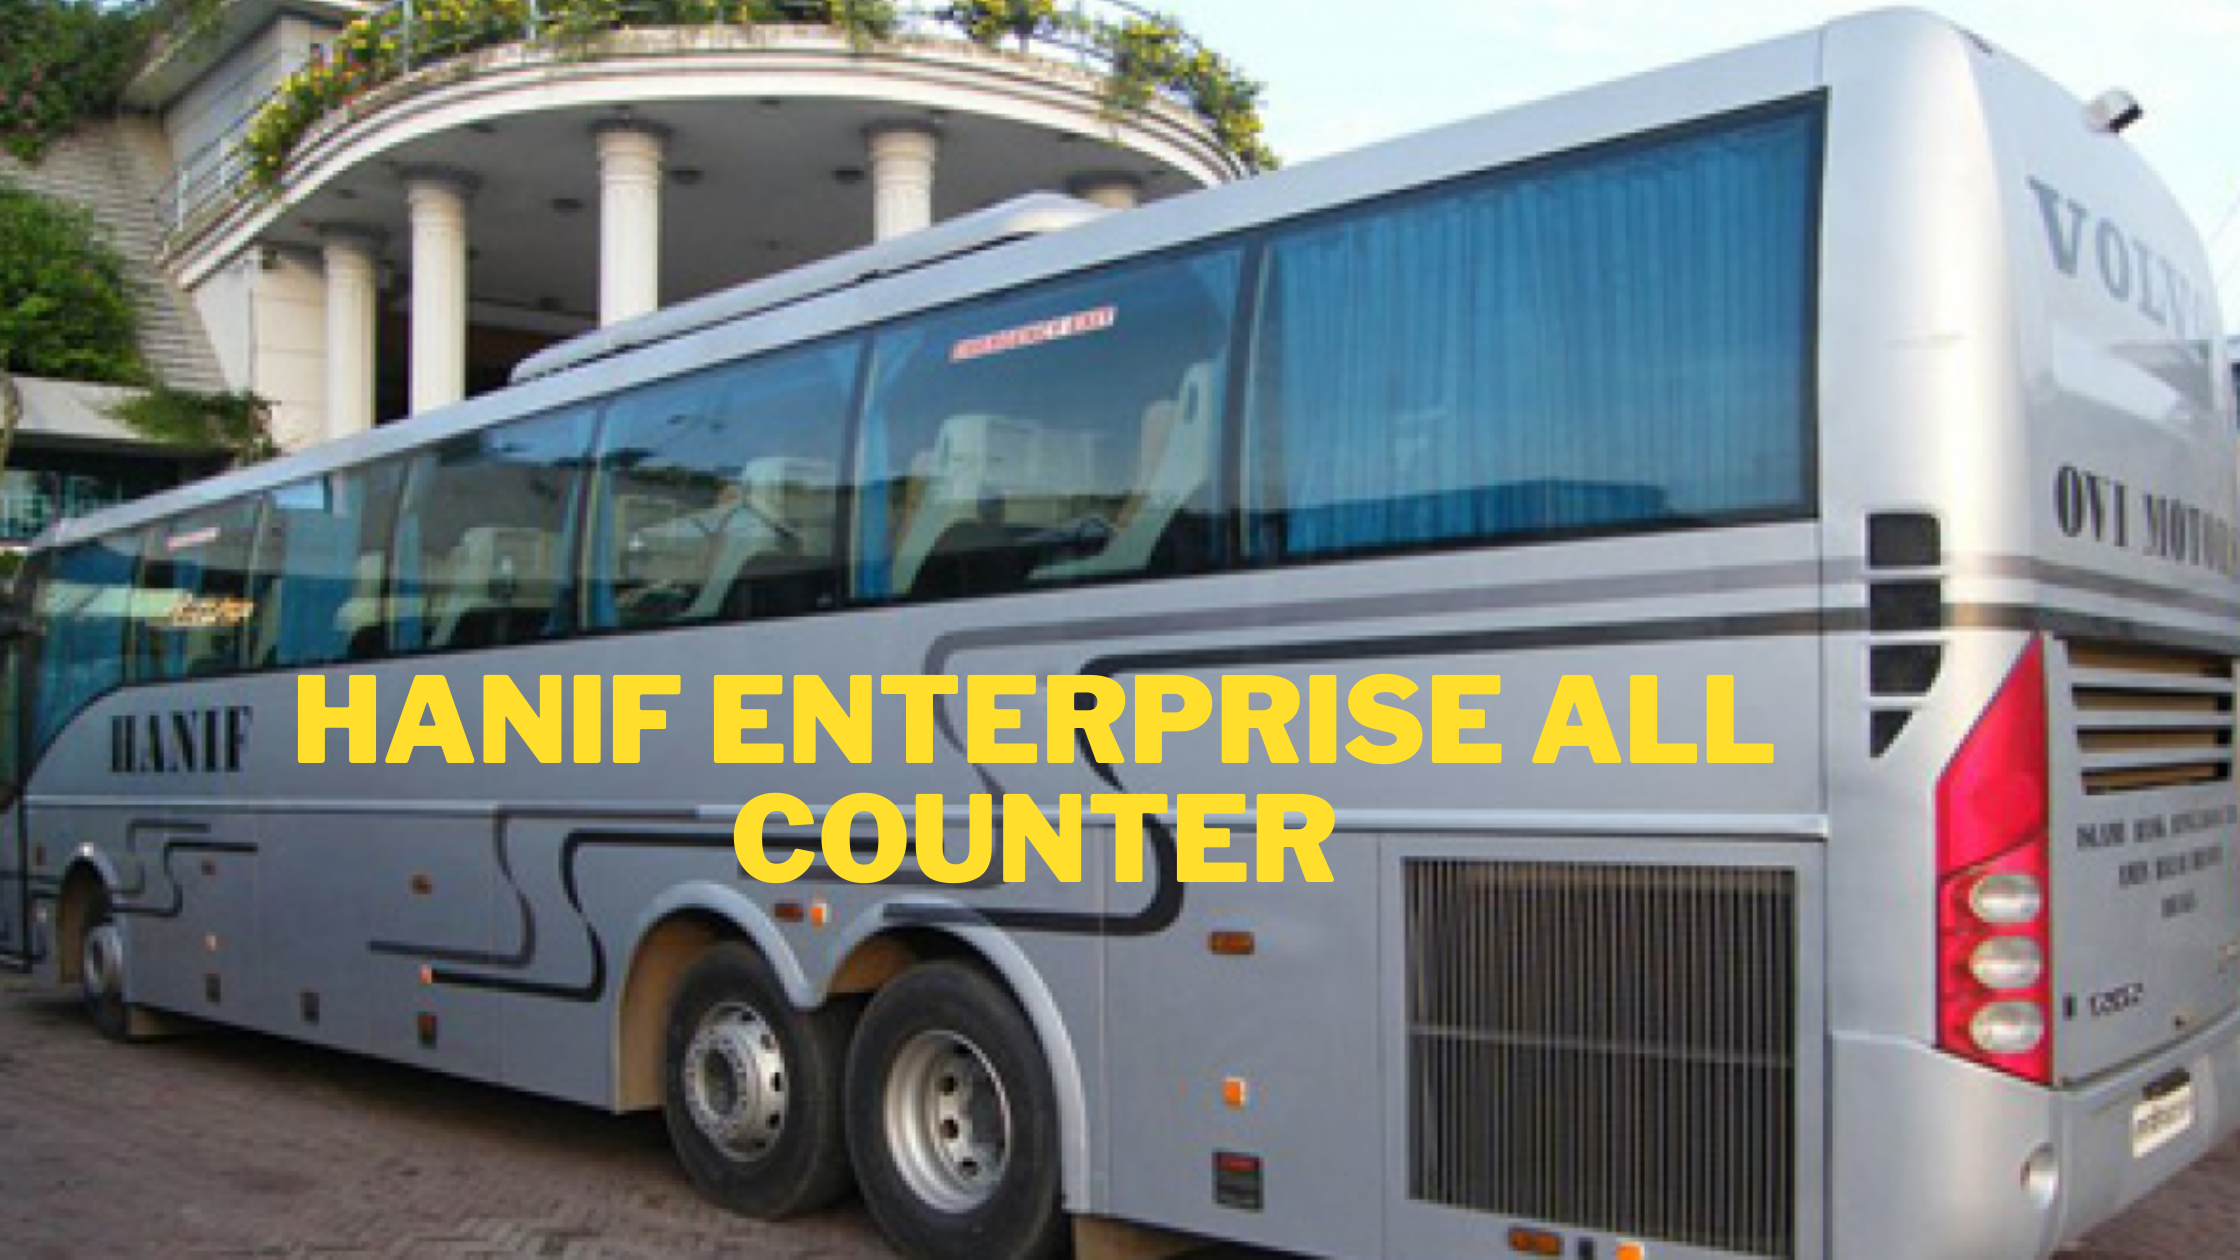 Hanif Enterprise All Counter Mobile Number & Address - Uptowrite ...